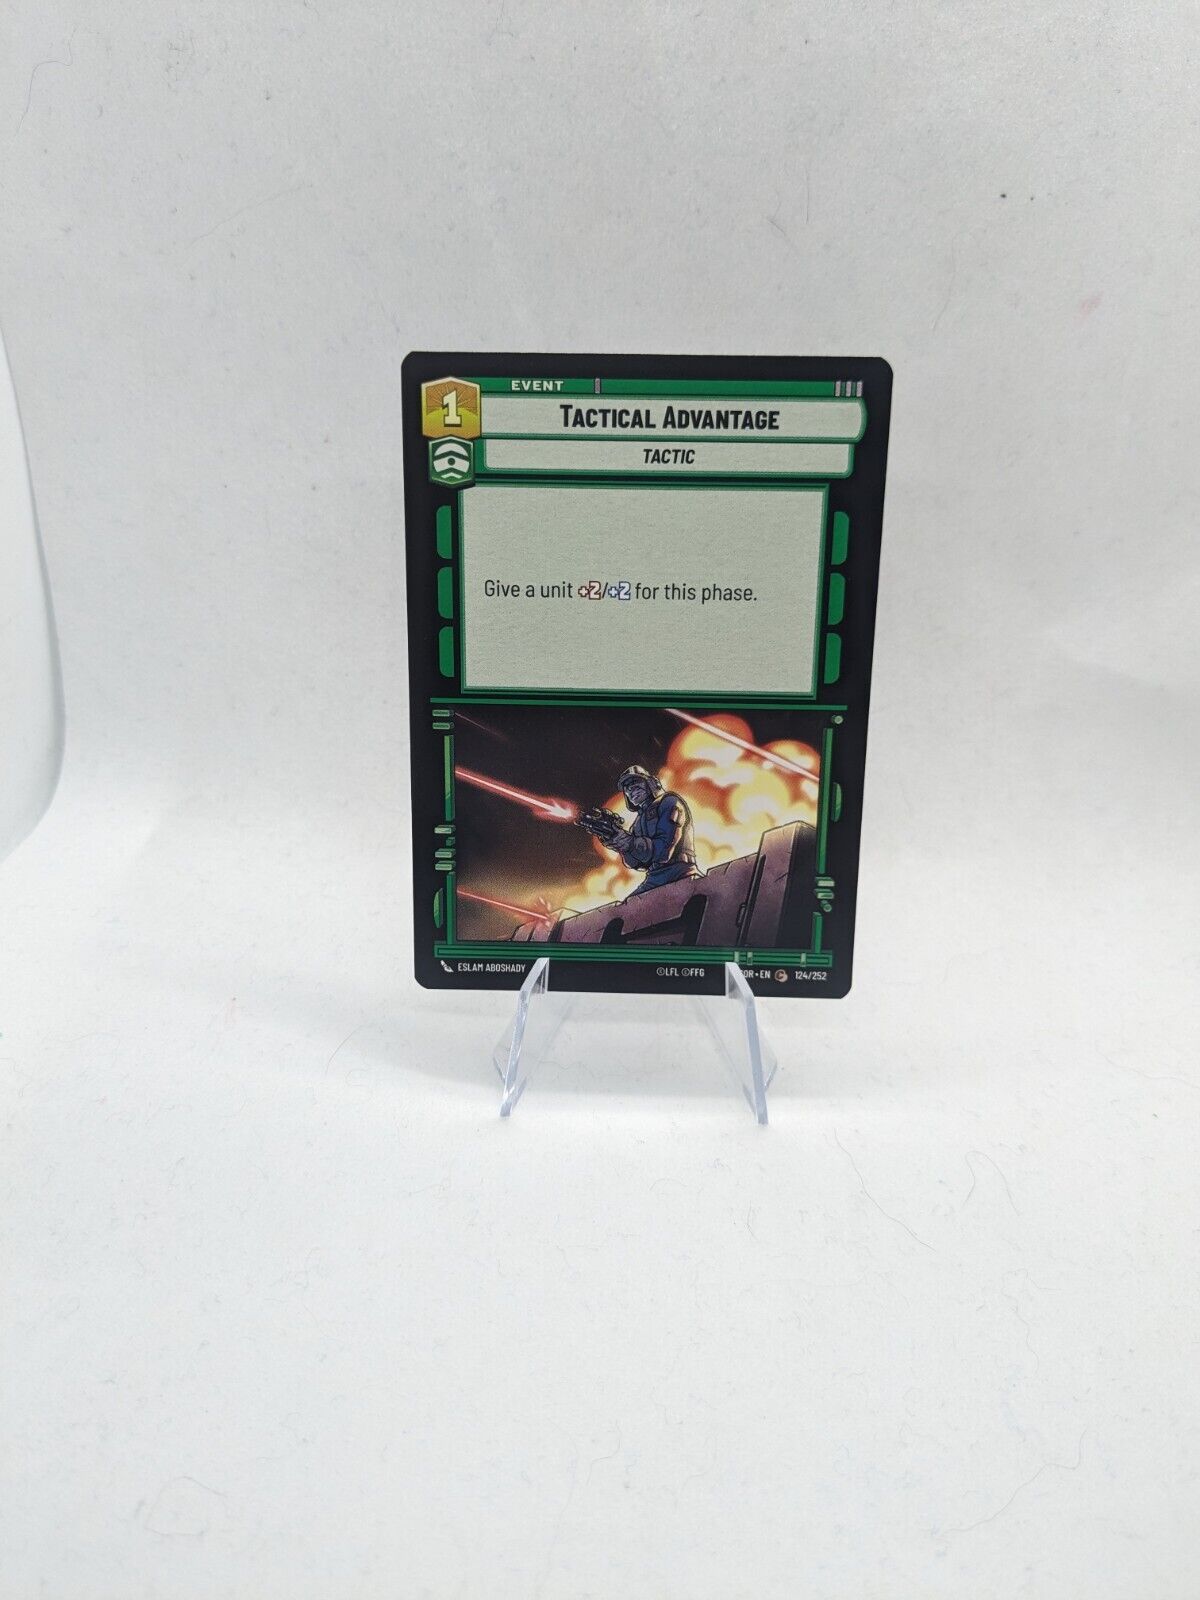 Tactical Advantage 124/252 Common Star Wars Unlimited Card